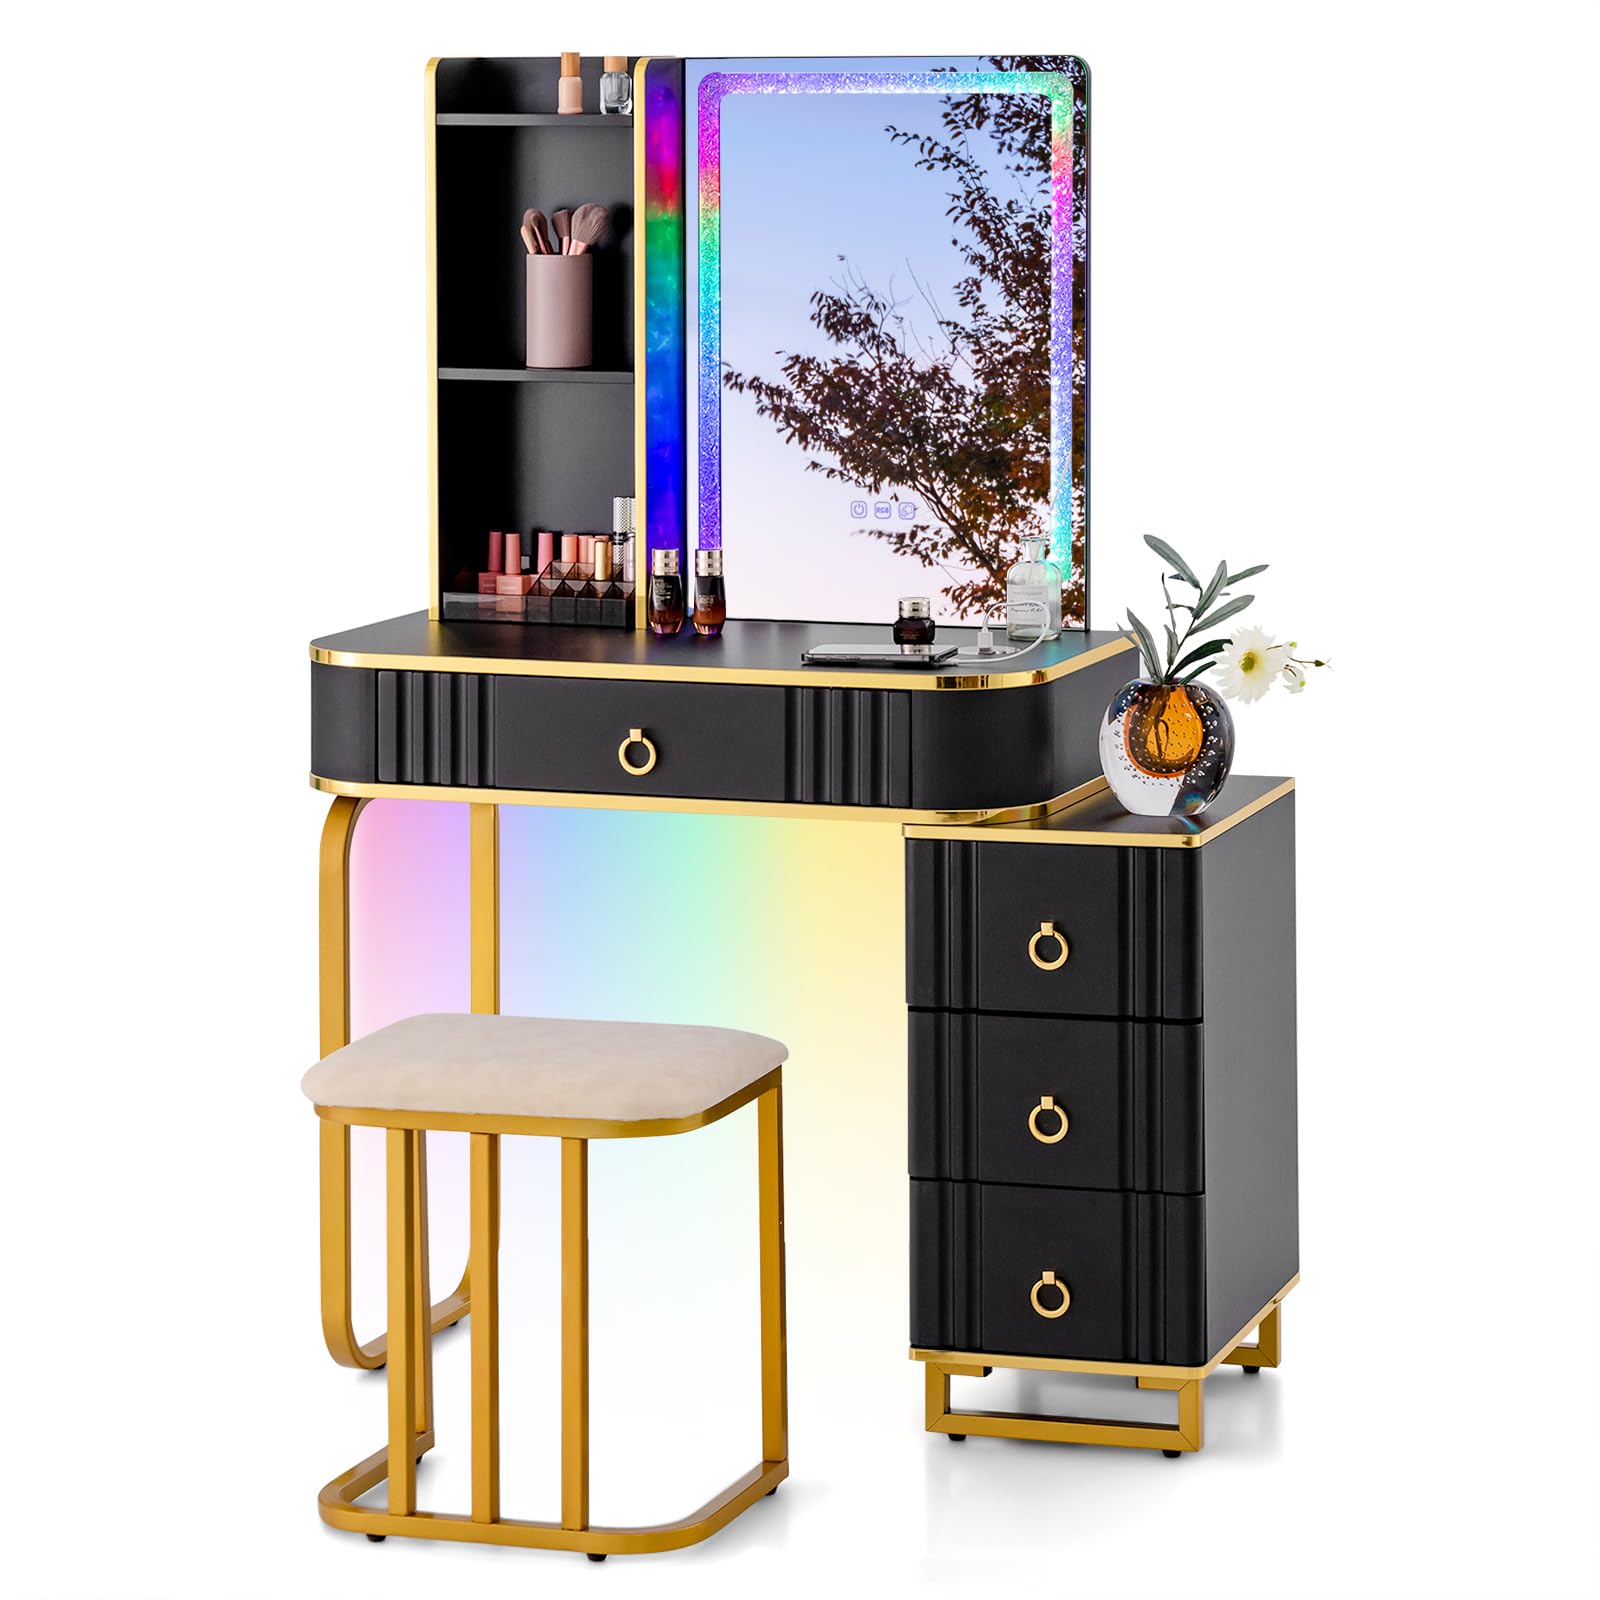 CHARMAID RBG LED Makeup Vanity Table, Colorful Lighted Mirror, 7 Dynamic & 7 Static Modes, 3-Drawer Chest